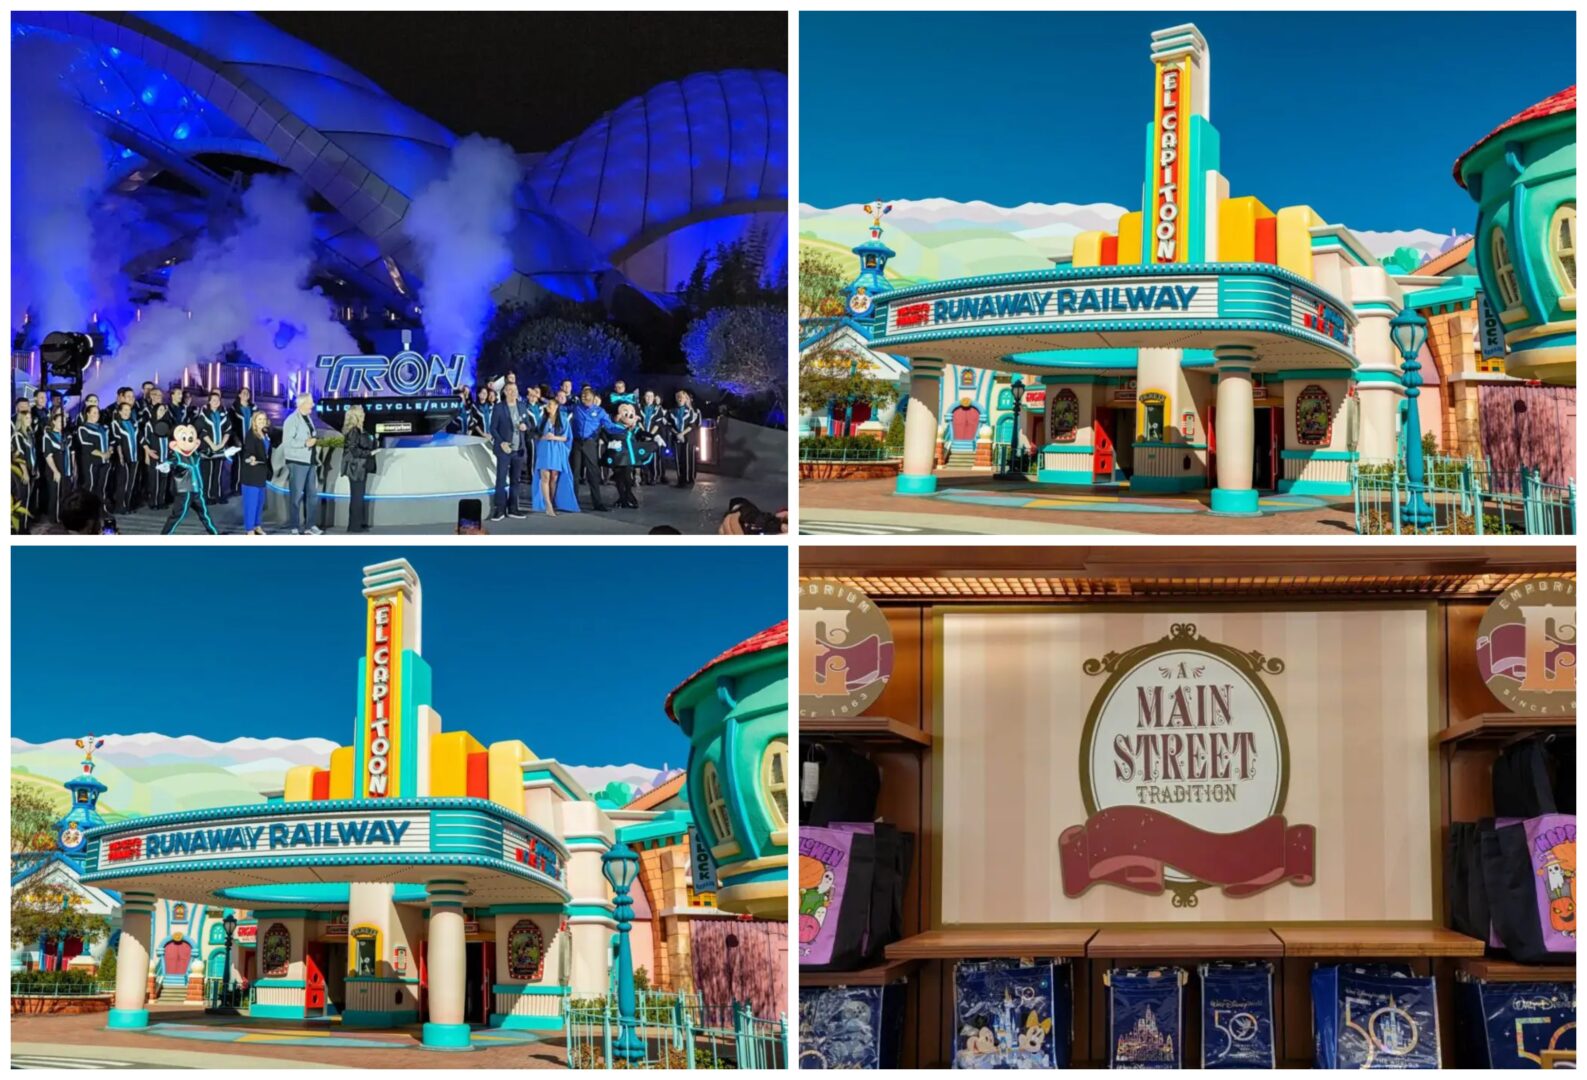 Disney News Highlights: Guest Climbs on Muppet Topiary, Virtual Queue Now Open for Tron Lightcycle Run, Plastic Bags Being Phased out of Disney World, New Roundup Rodeo BBQ Walkthrough